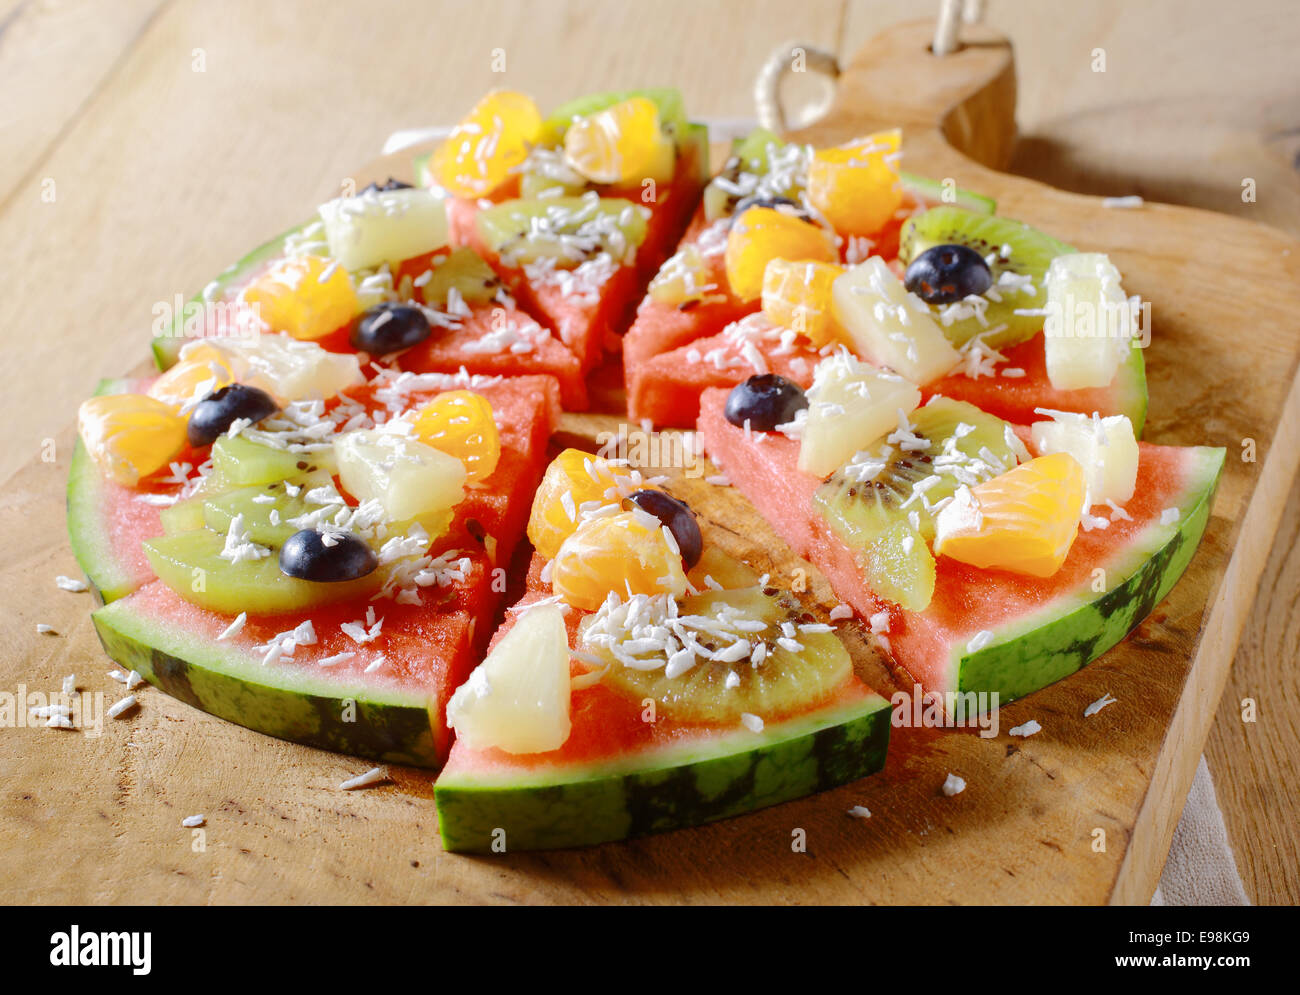 A tasty juicy fresh tropical fruit watermelon pizza topped with kiwifruit, blueberries, orange, pineapple, and topped with dried coconut, cut into segments on a wooden board for a nutritious dessert Stock Photo